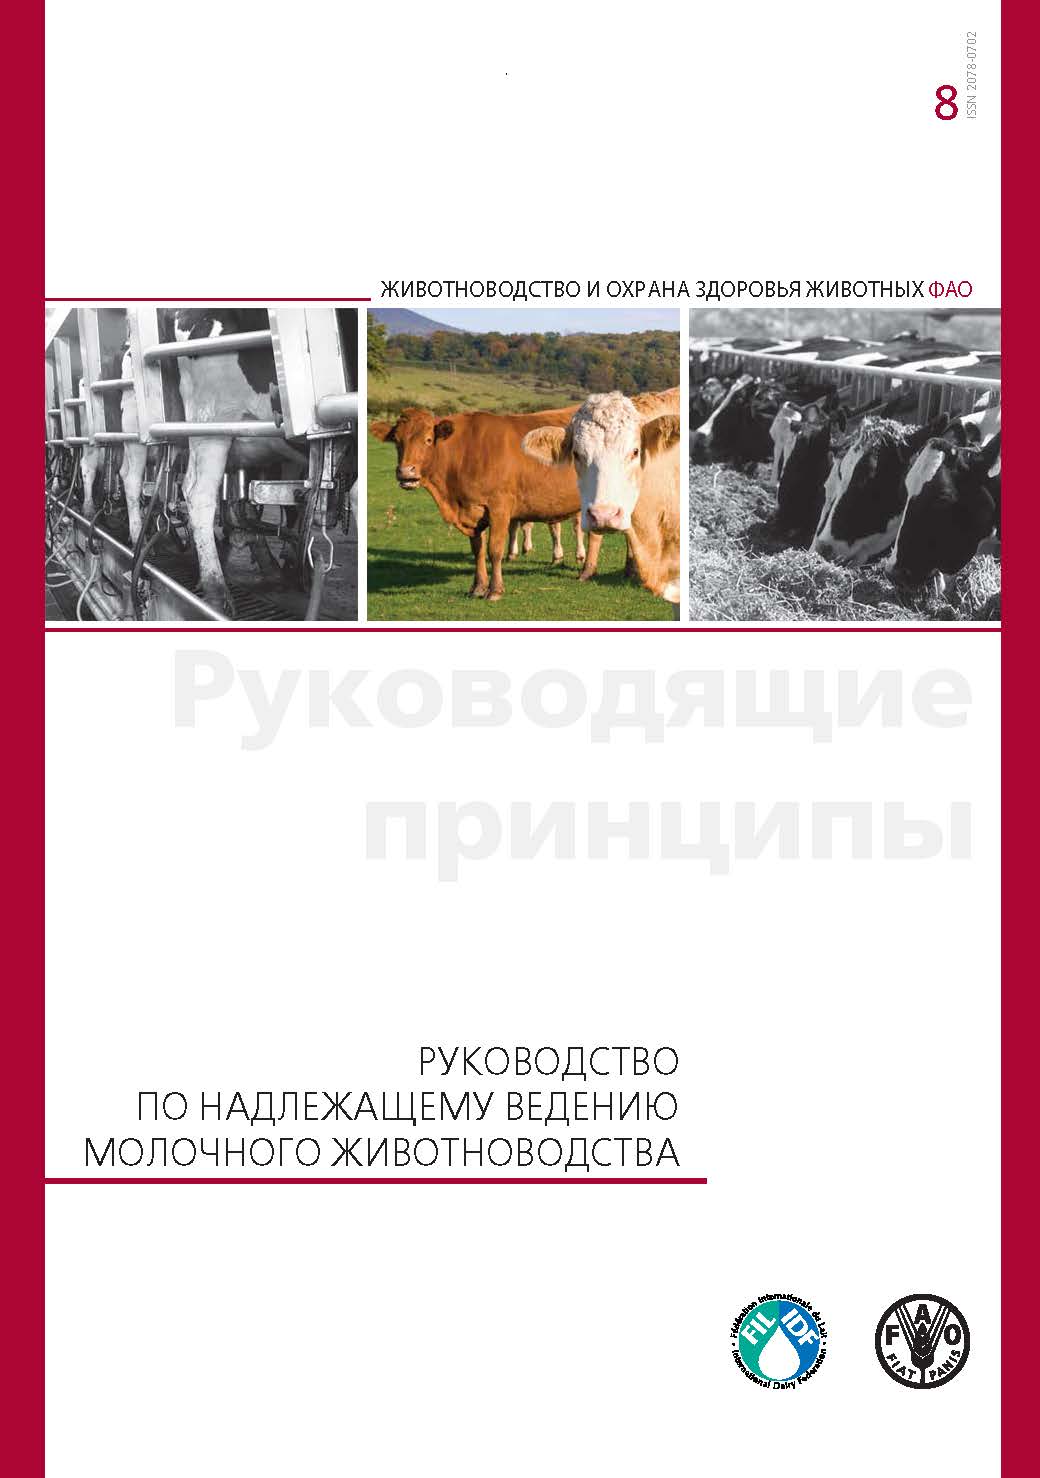 Guide to Good Dairy Farming Practice in Russian (2011) - FIL-IDF